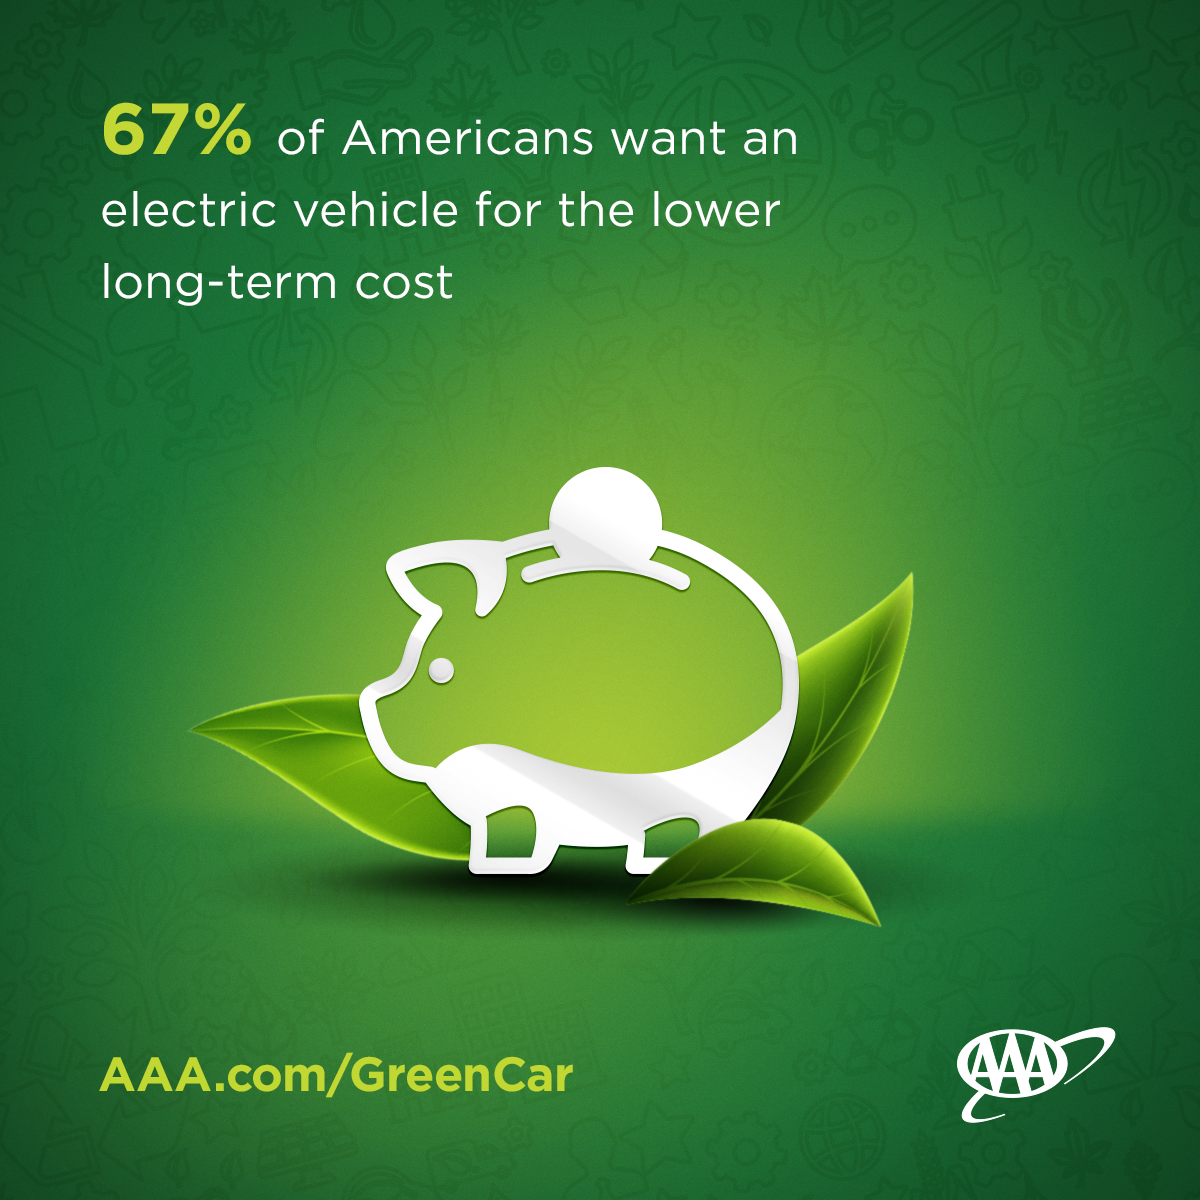 AAA study found that 67% of Americans want an electric vehicle for the lower long-term cost